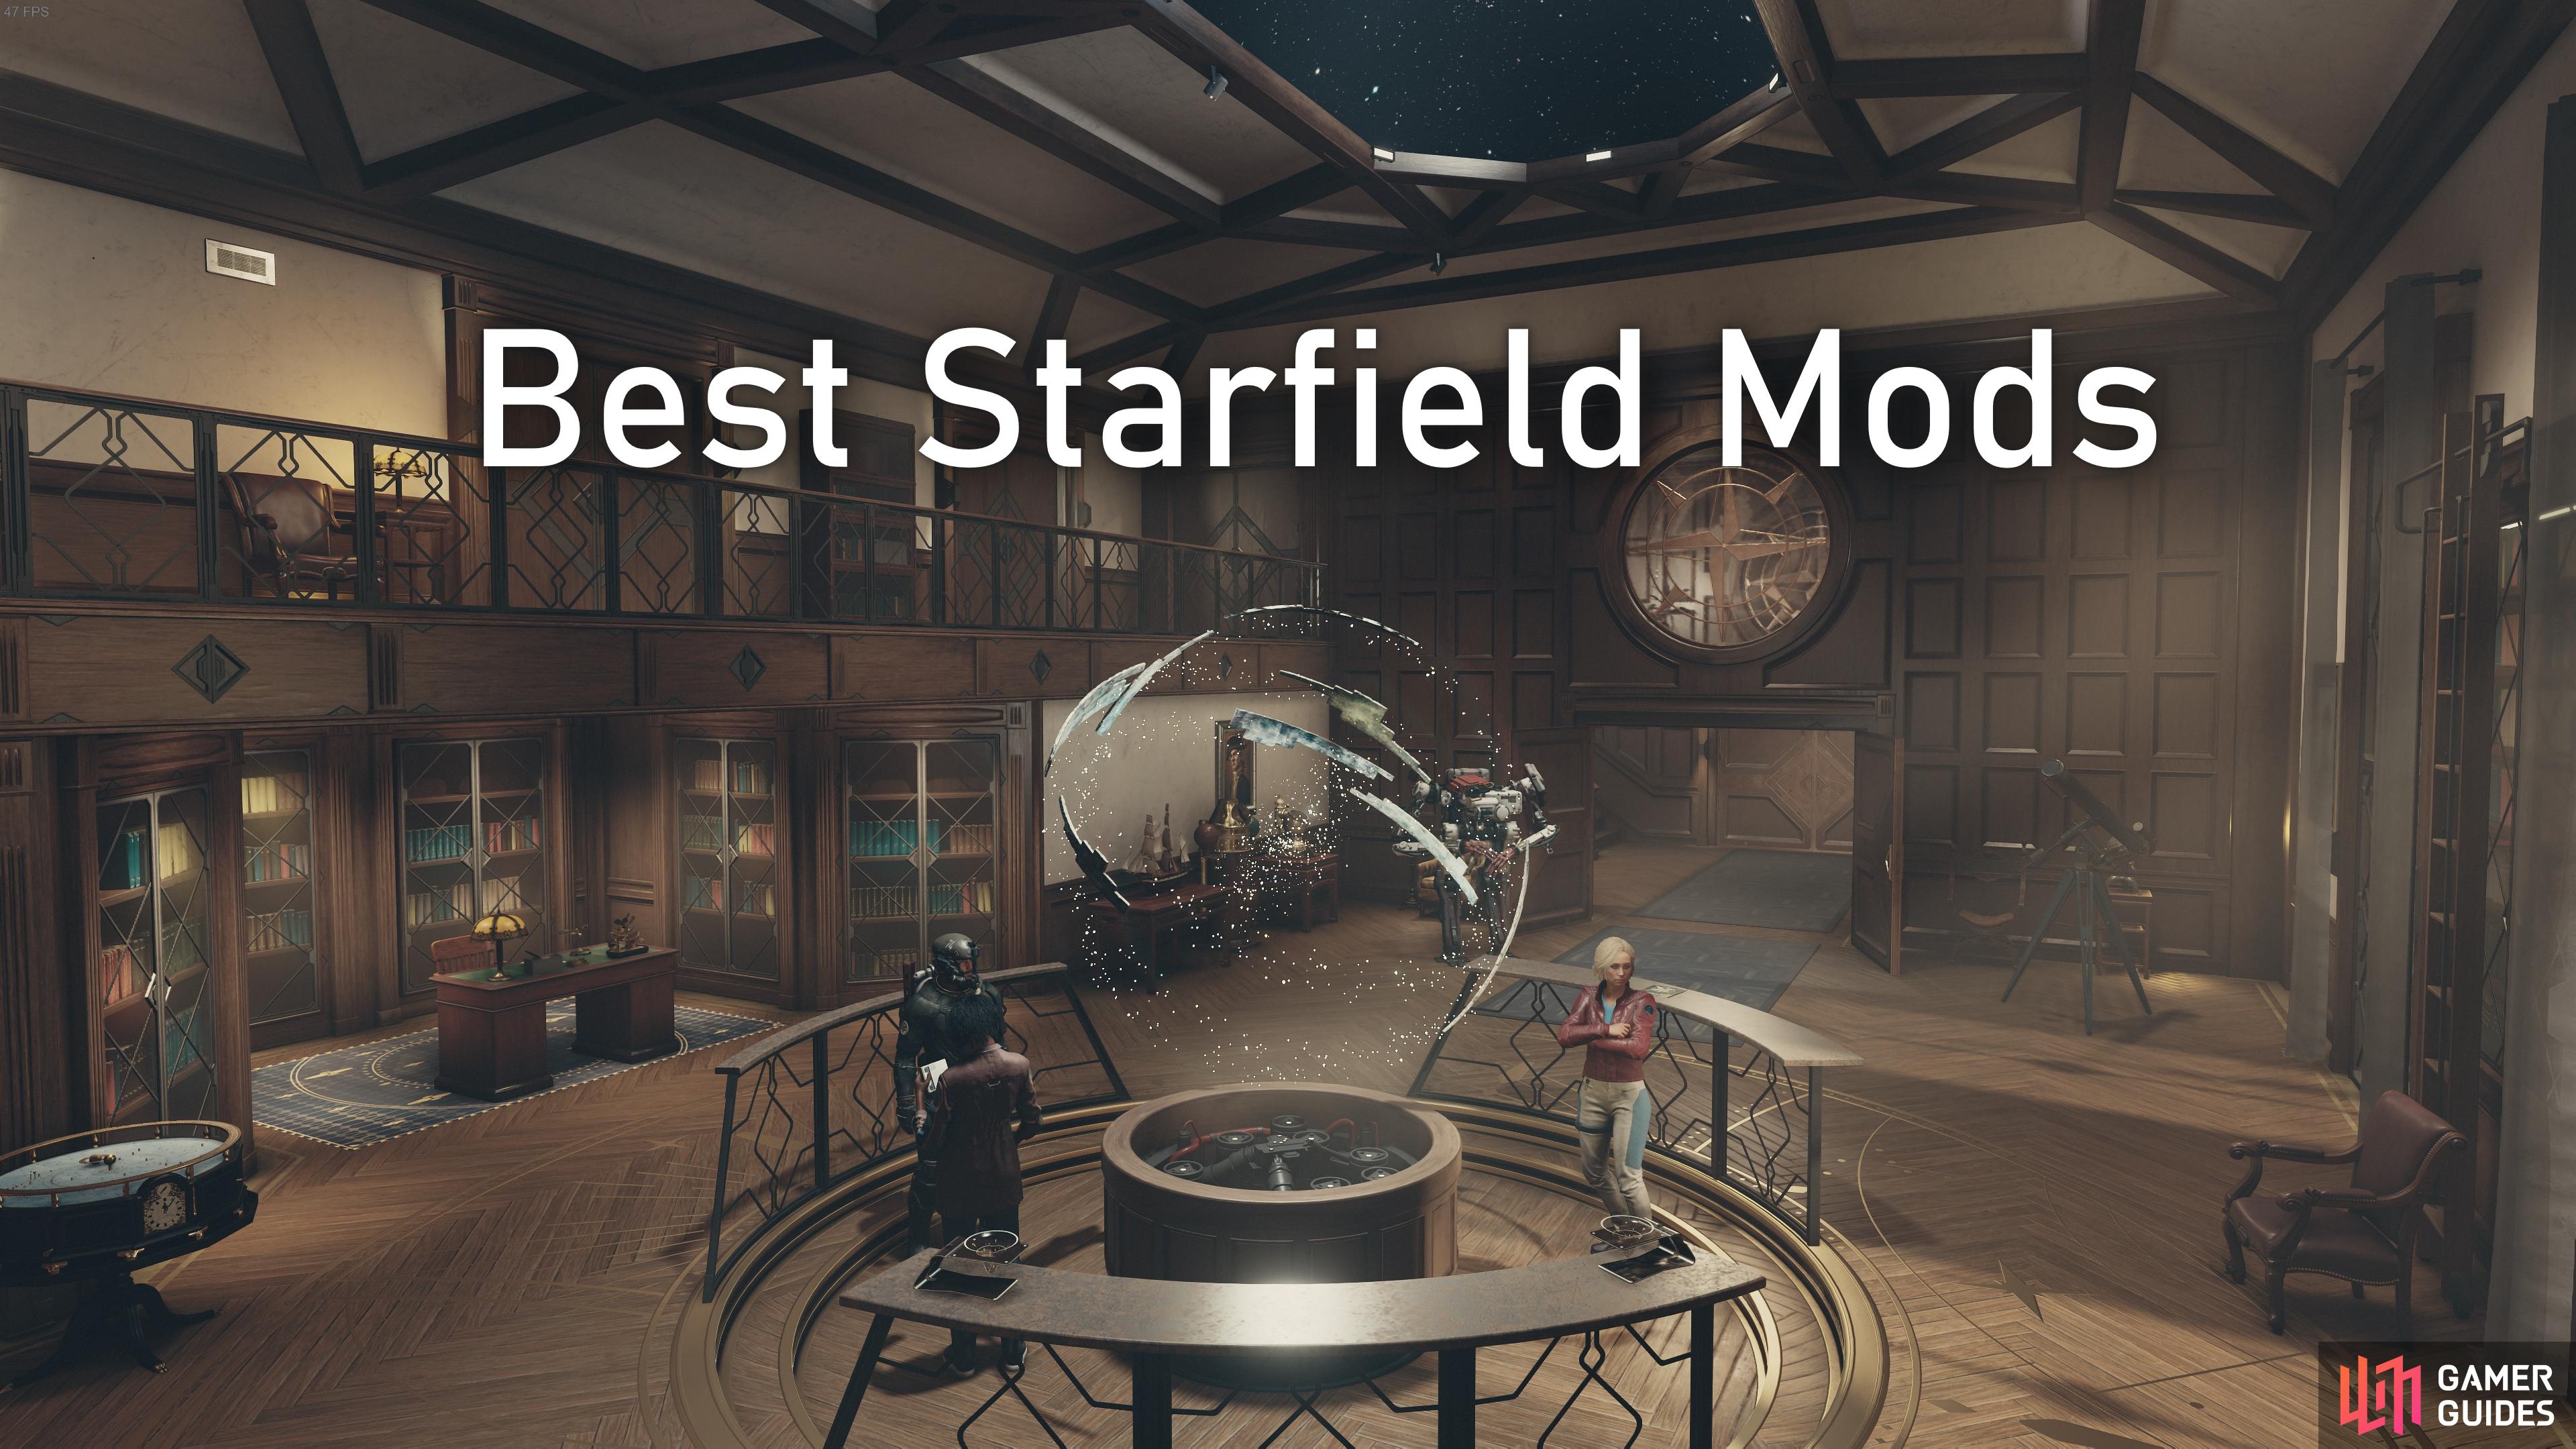 Starfield Modding is Quite Difficult for Now, Starfield Community